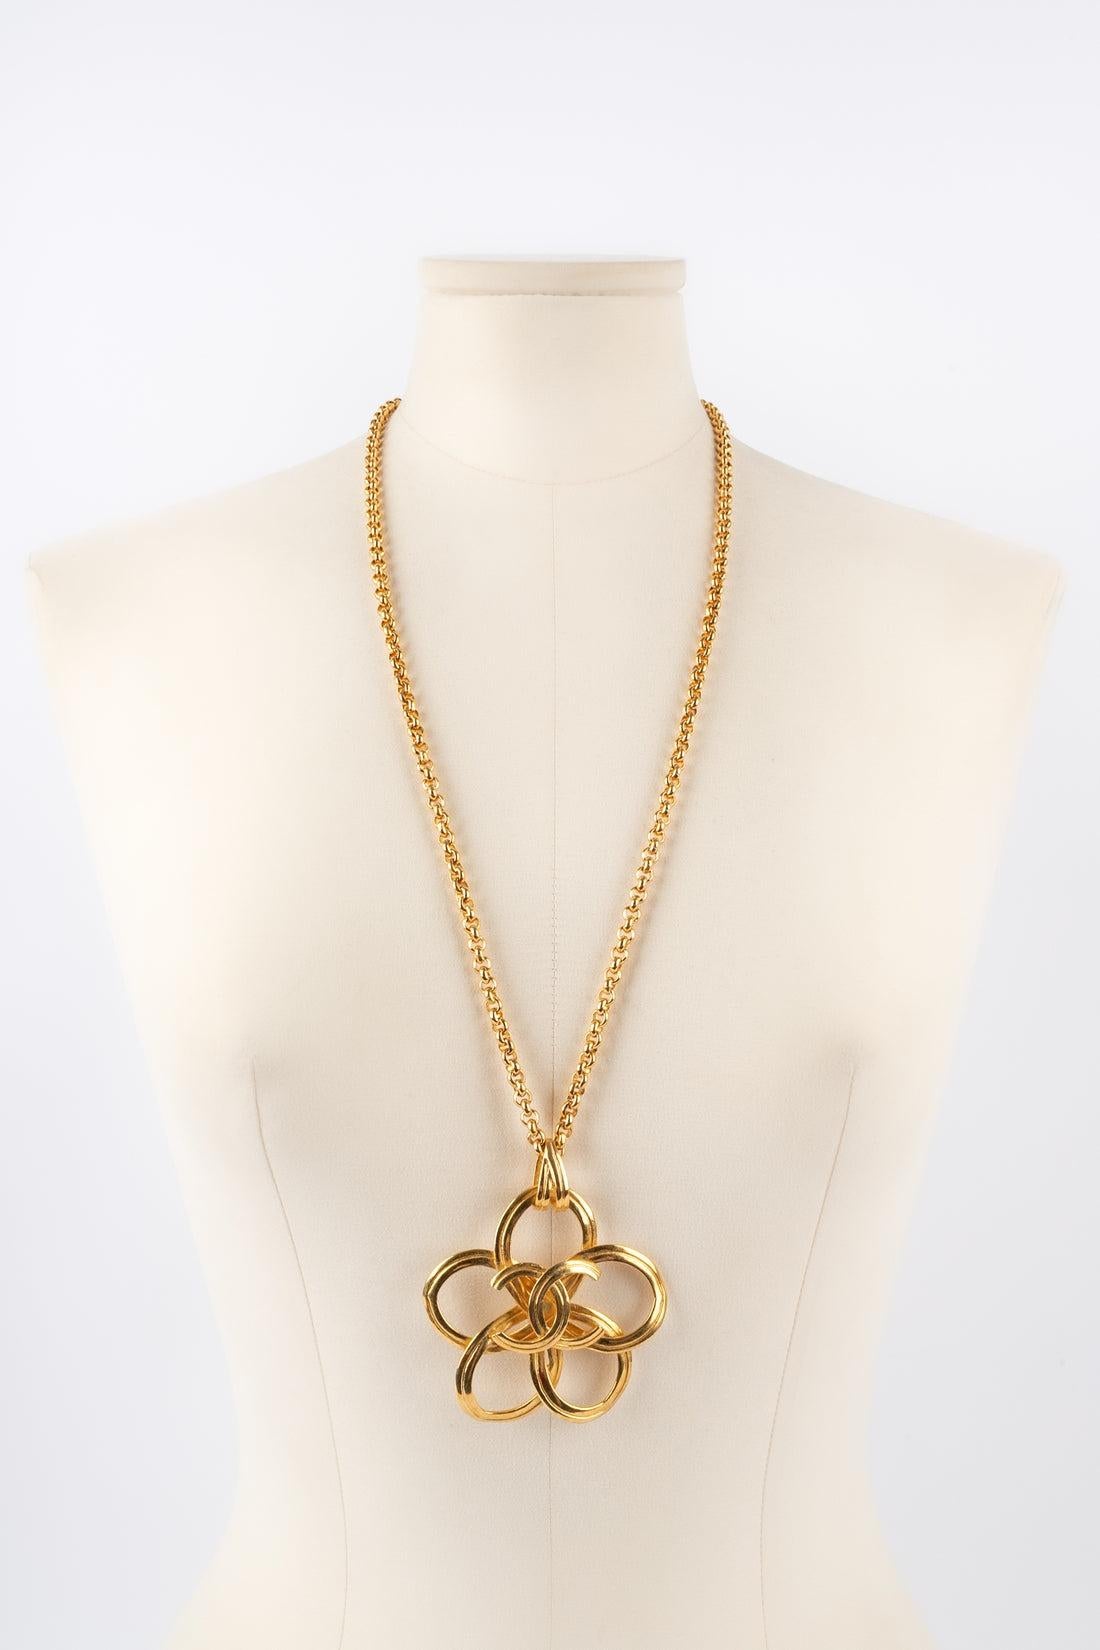 Chanel - (Made in France) Golden metal necklace with a flower pendant centered with a cc logo. 1996 Spring-Summer Collection.

Additional information:
Condition: Very good condition
Dimensions: Length: 70 cm - Pendant: 6.5 cm
Period: 20th